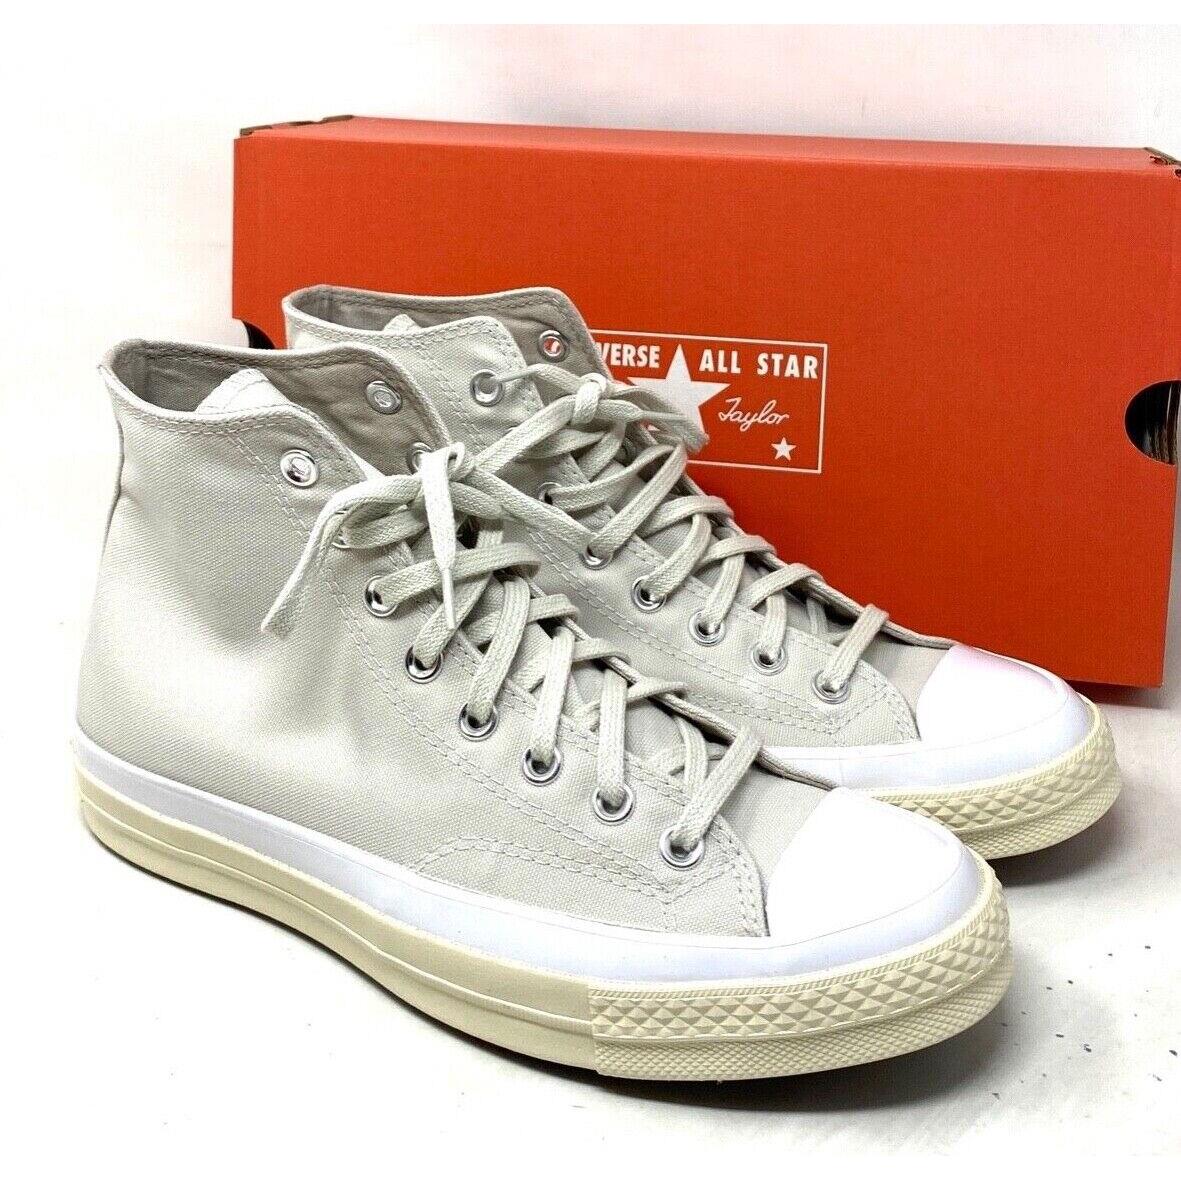 Converse Chuck 70 Shoes Canvas Egret Women Size High Top Casual Sneakers A00727C